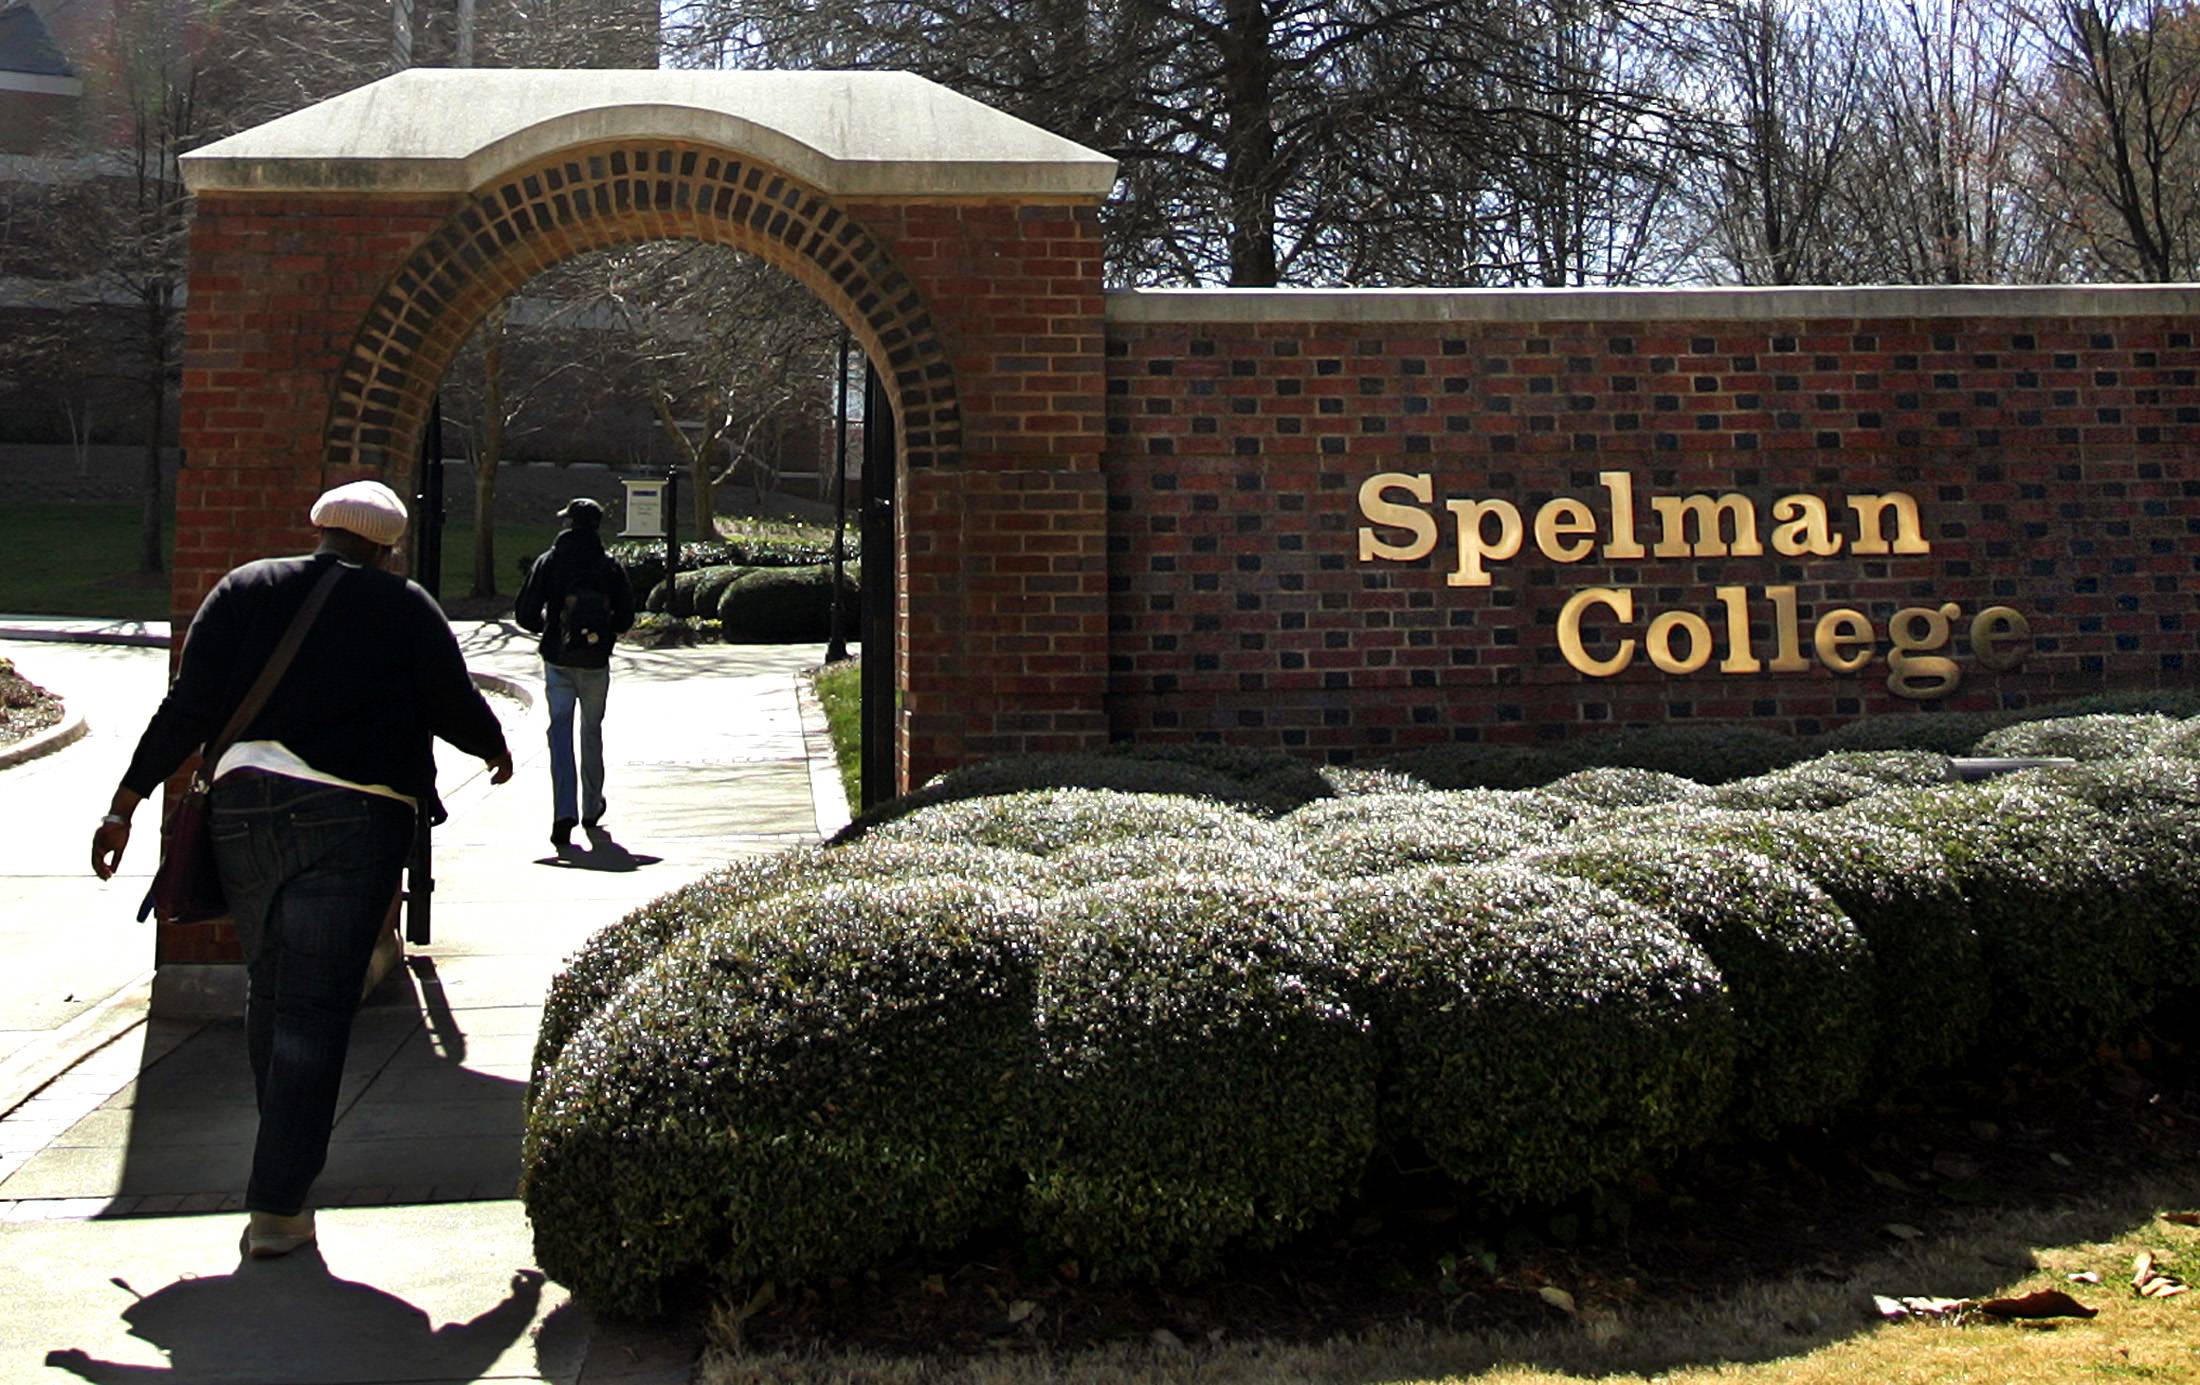 #1: Spelman CollegeAtlanta, Georgia - From Spelman to Alcorn State, &quot;U.S. News and World Report&quot; has ranked the top Historically Black Colleges and Universities for the fifth year. BET.com presents the top 25 schools as ranked by the publication. (Some schools are included in other rankings, which we've included.) &nbsp;2011-2012 Tuition and Fees: $23,254Enrollment: 2,177, all femaleAdmissions application deadline: Feb. 1Acceptance rate: 39.2%National Liberal Arts ranking: 62(Photo: Spelman.edu)&nbsp;